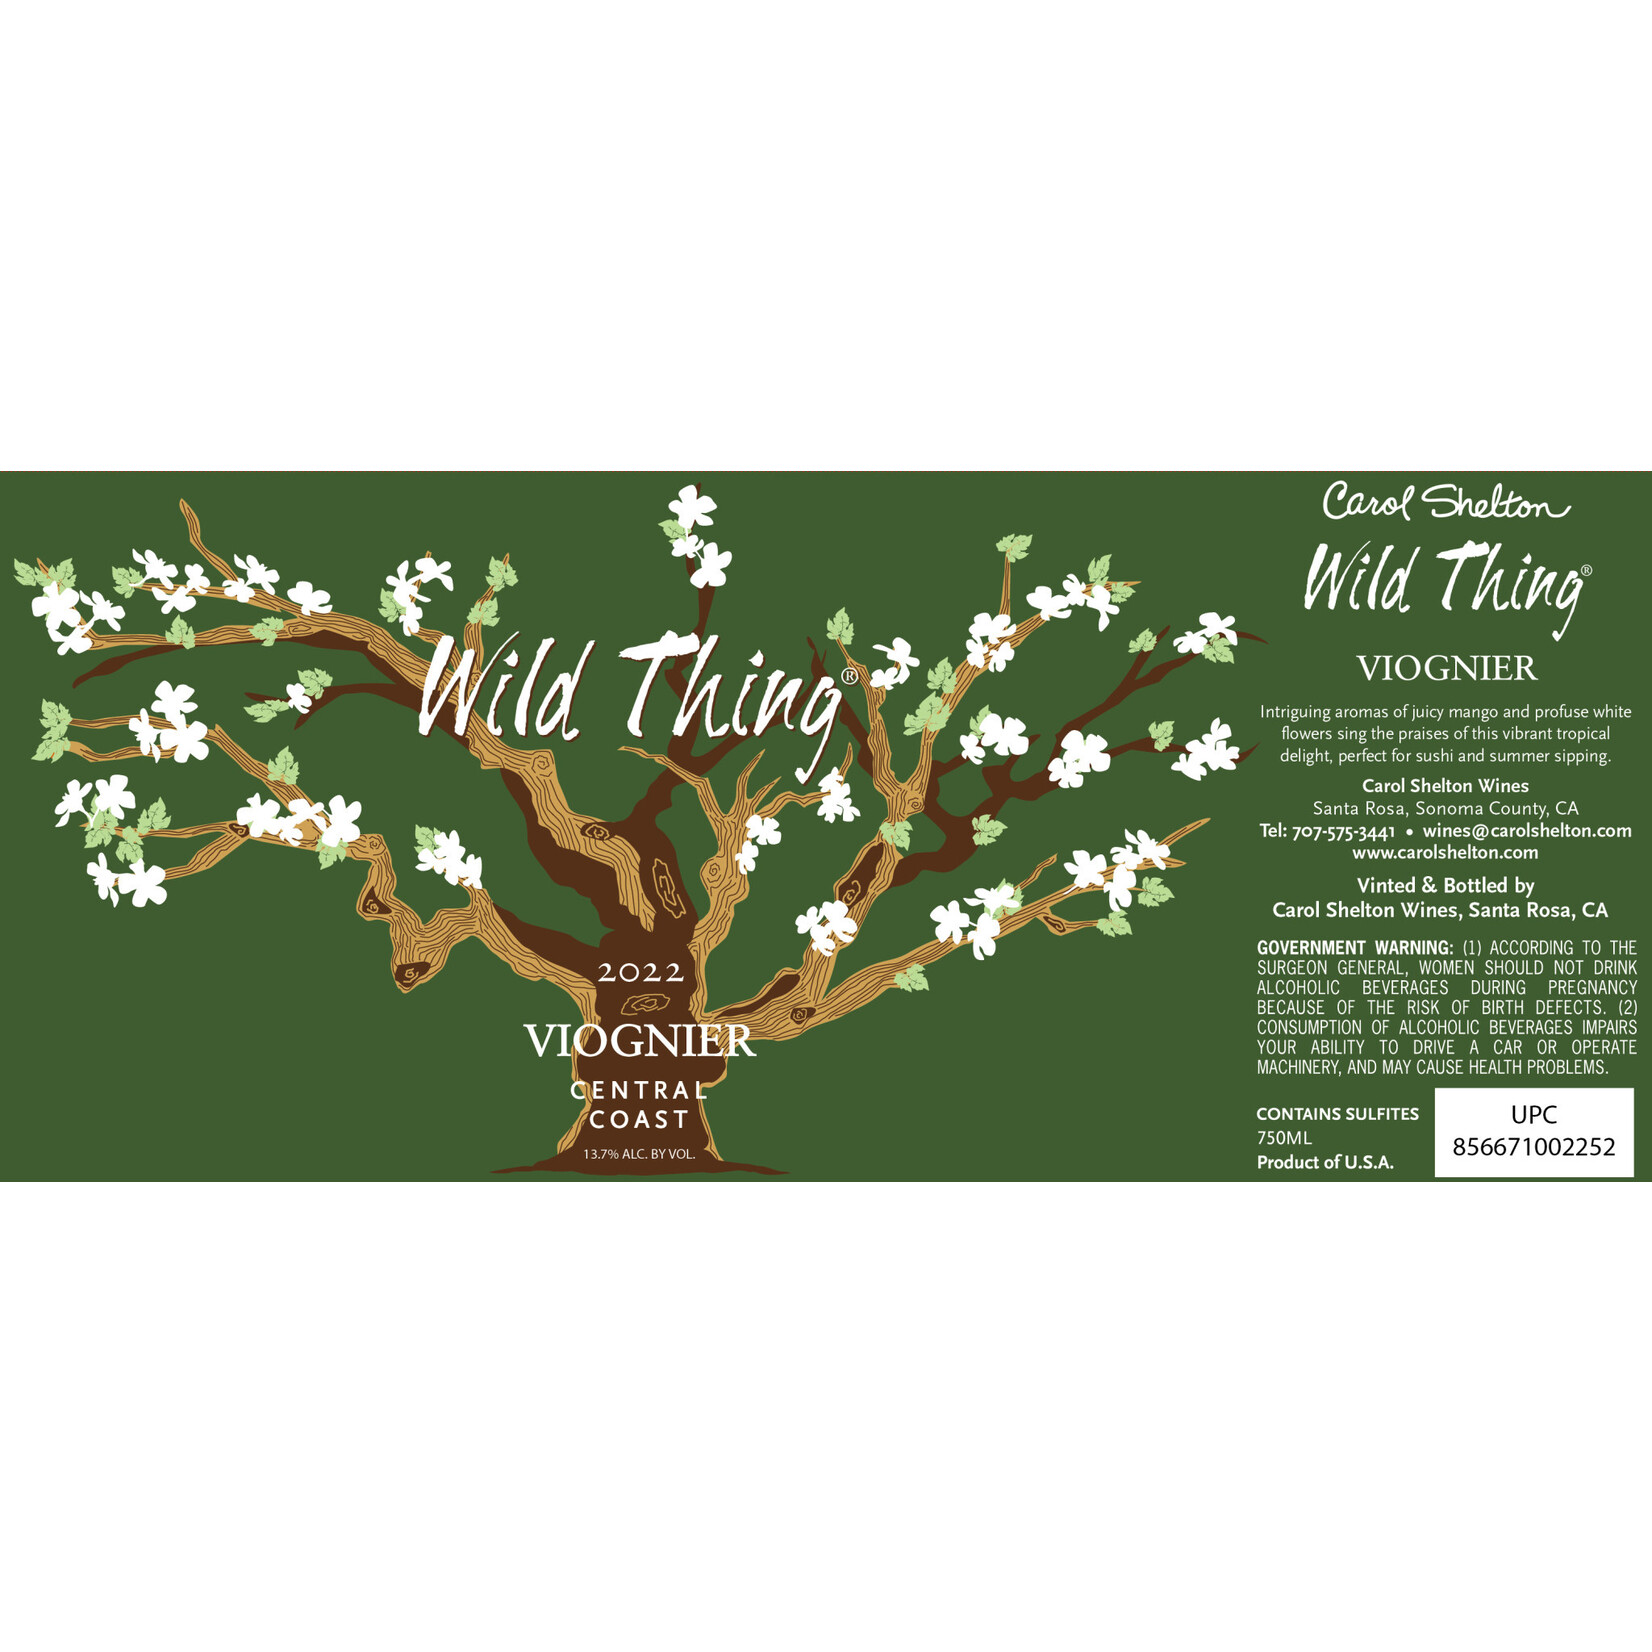 Wild Thing Wild Thing Old Vine Viognier 2022 Central Coast California